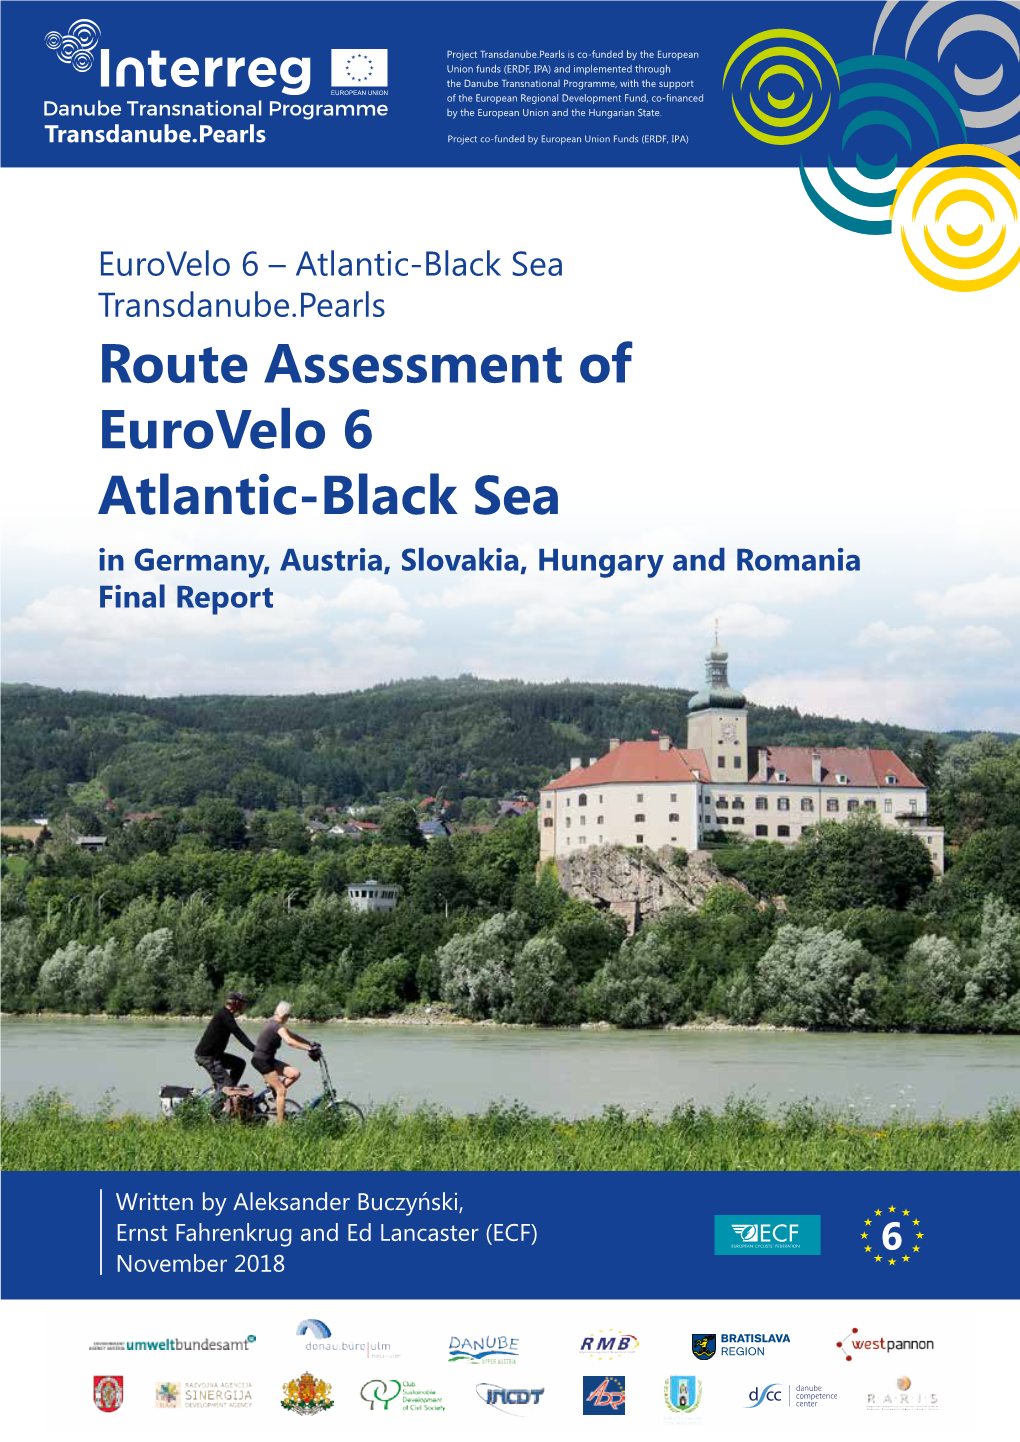 Route Assessment of Eurovelo 6 Atlantic-Black Sea in Germany, Austria, Slovakia, Hungary and Romania Final Report